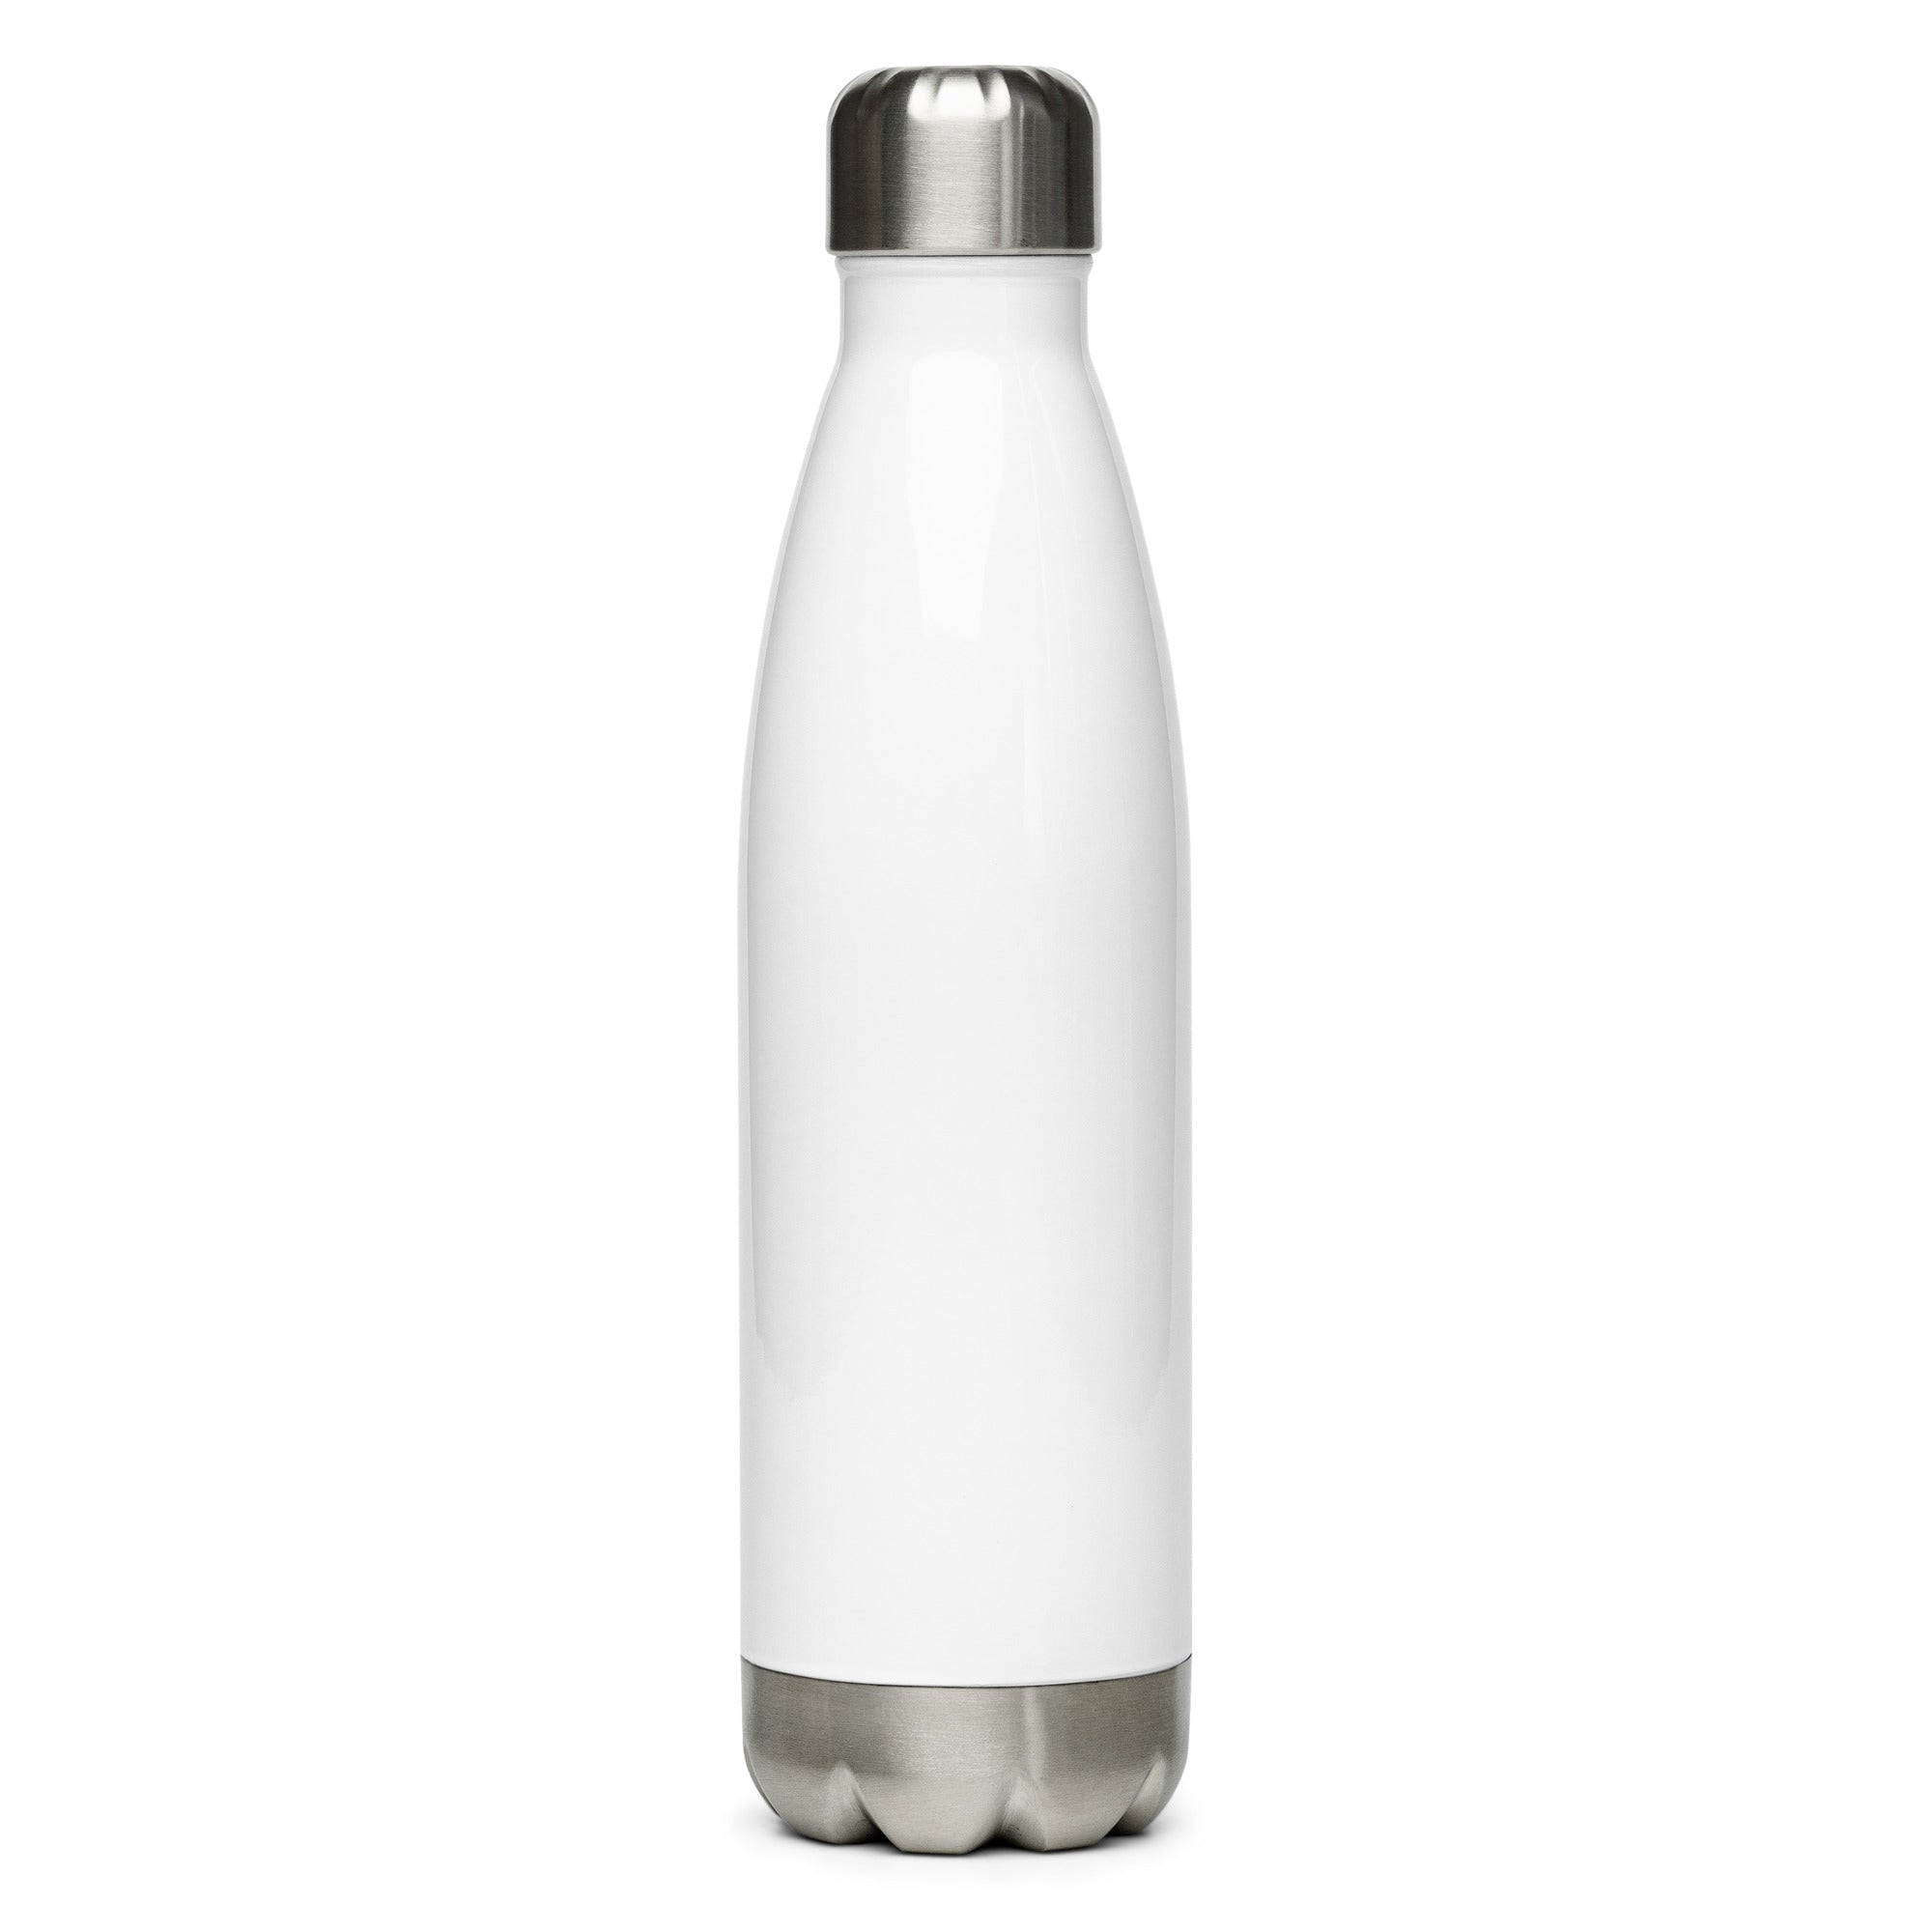 Stainless steel water bottle - Proverbs 11:25